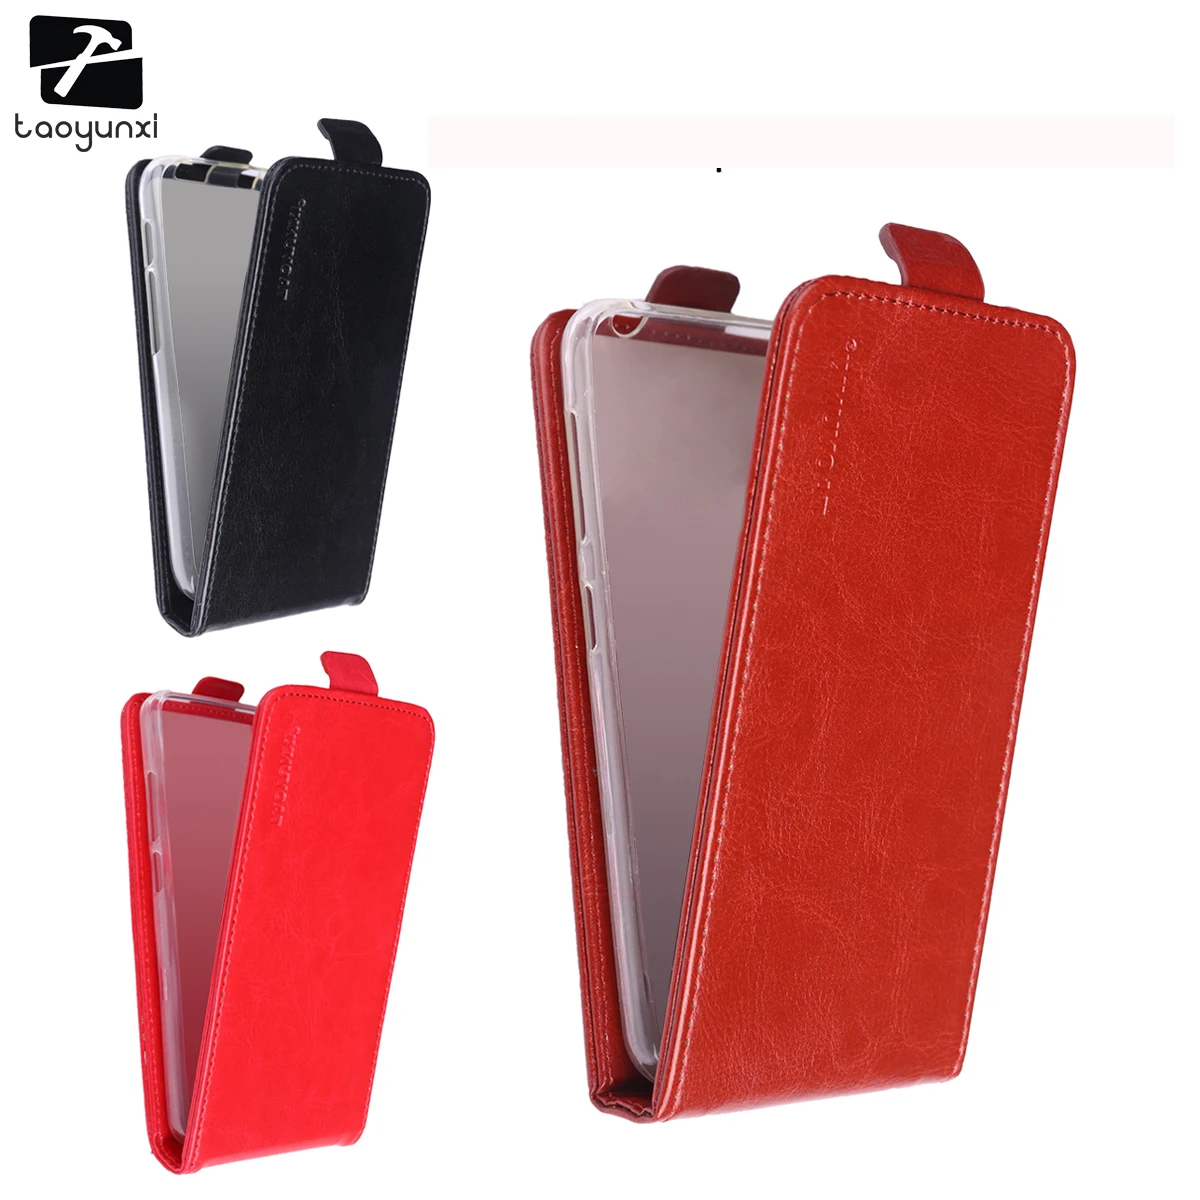 

TAOYUNXI PU Leather Flip TPU Cases For Doogee Homtom HT3 HT7 Homtom HT3 PRO HT17 HT16 Covers Case Holster bags shell